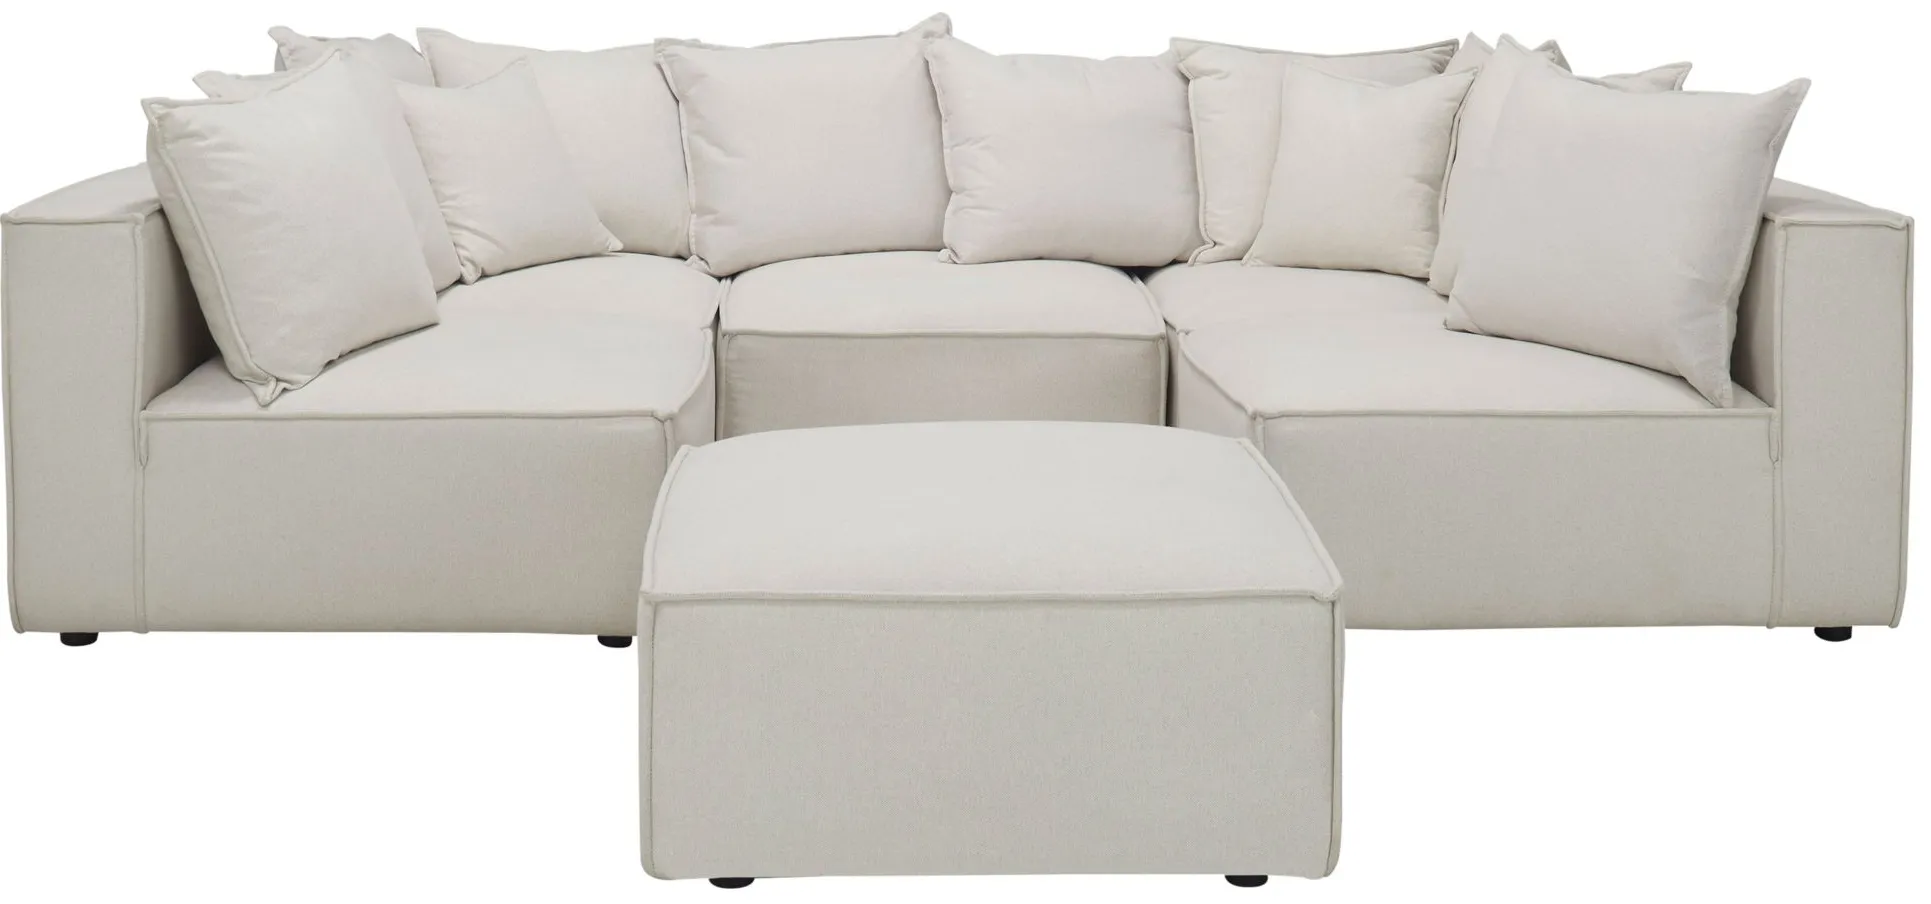 Loris Chenille 5-pc. Pit Sectional with Cocktail Ottoman in Buff by Aria Designs